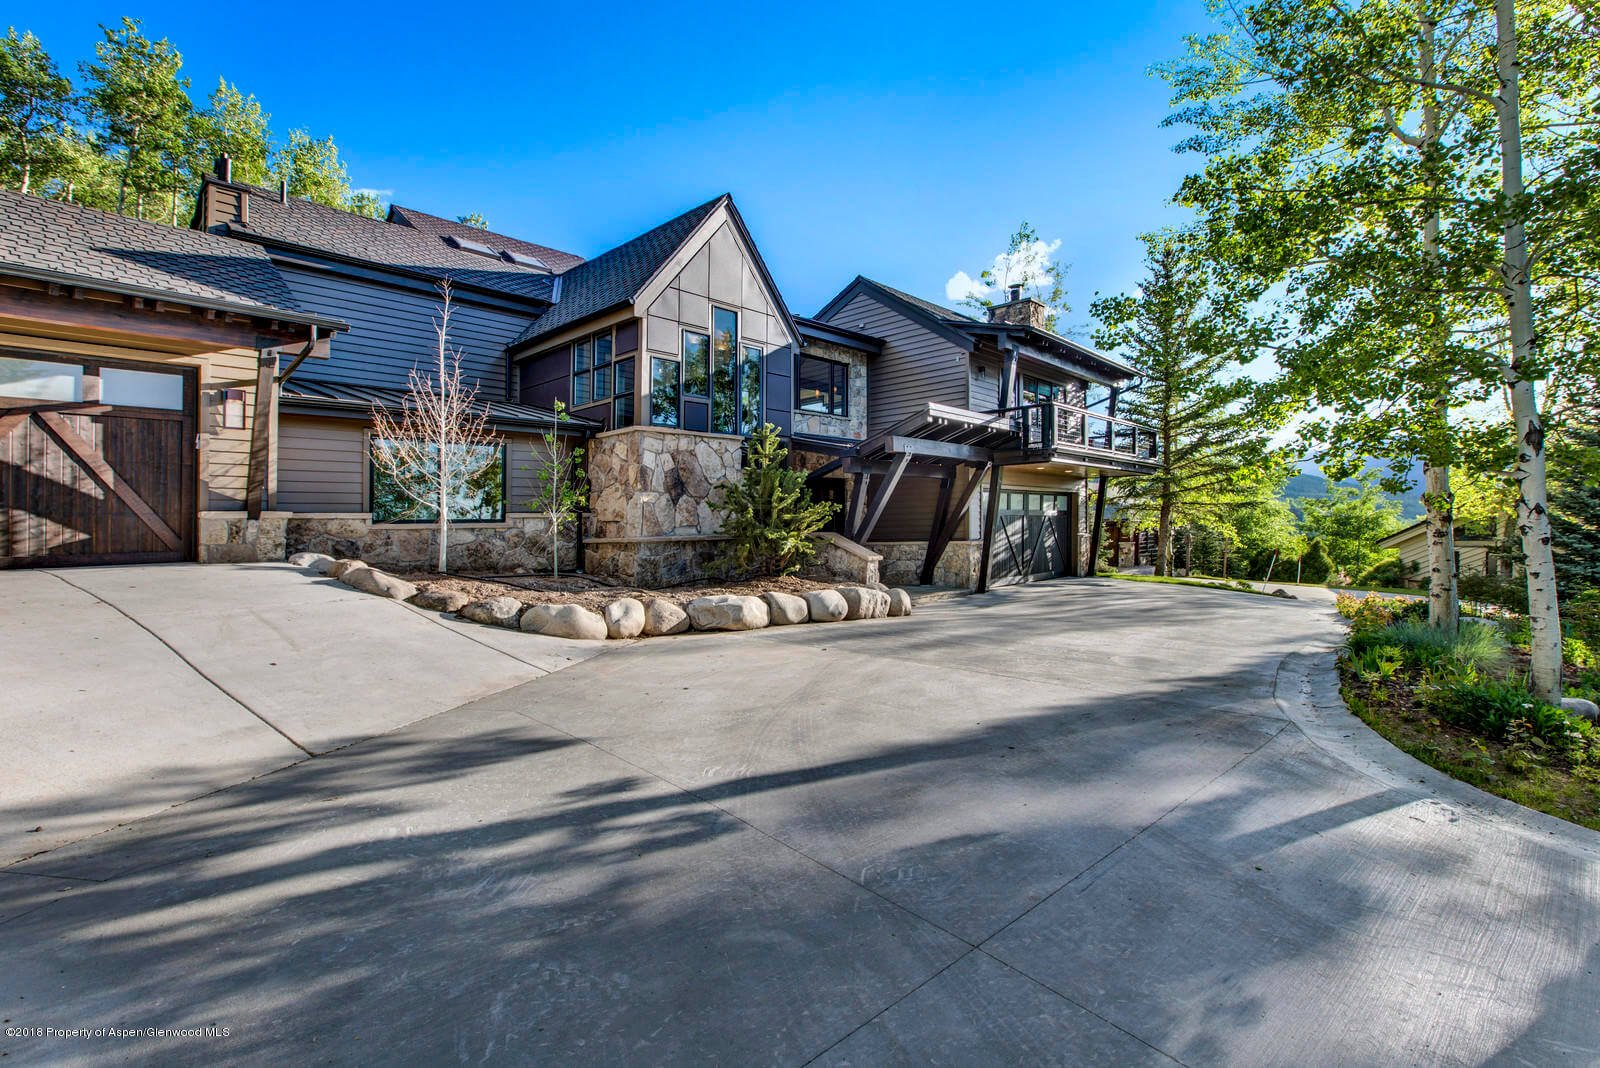 Snowmass Village 2018 Remodeled Ridge Run Home Closes at $5.7M/$1,357 Sq Ft Furnished Image